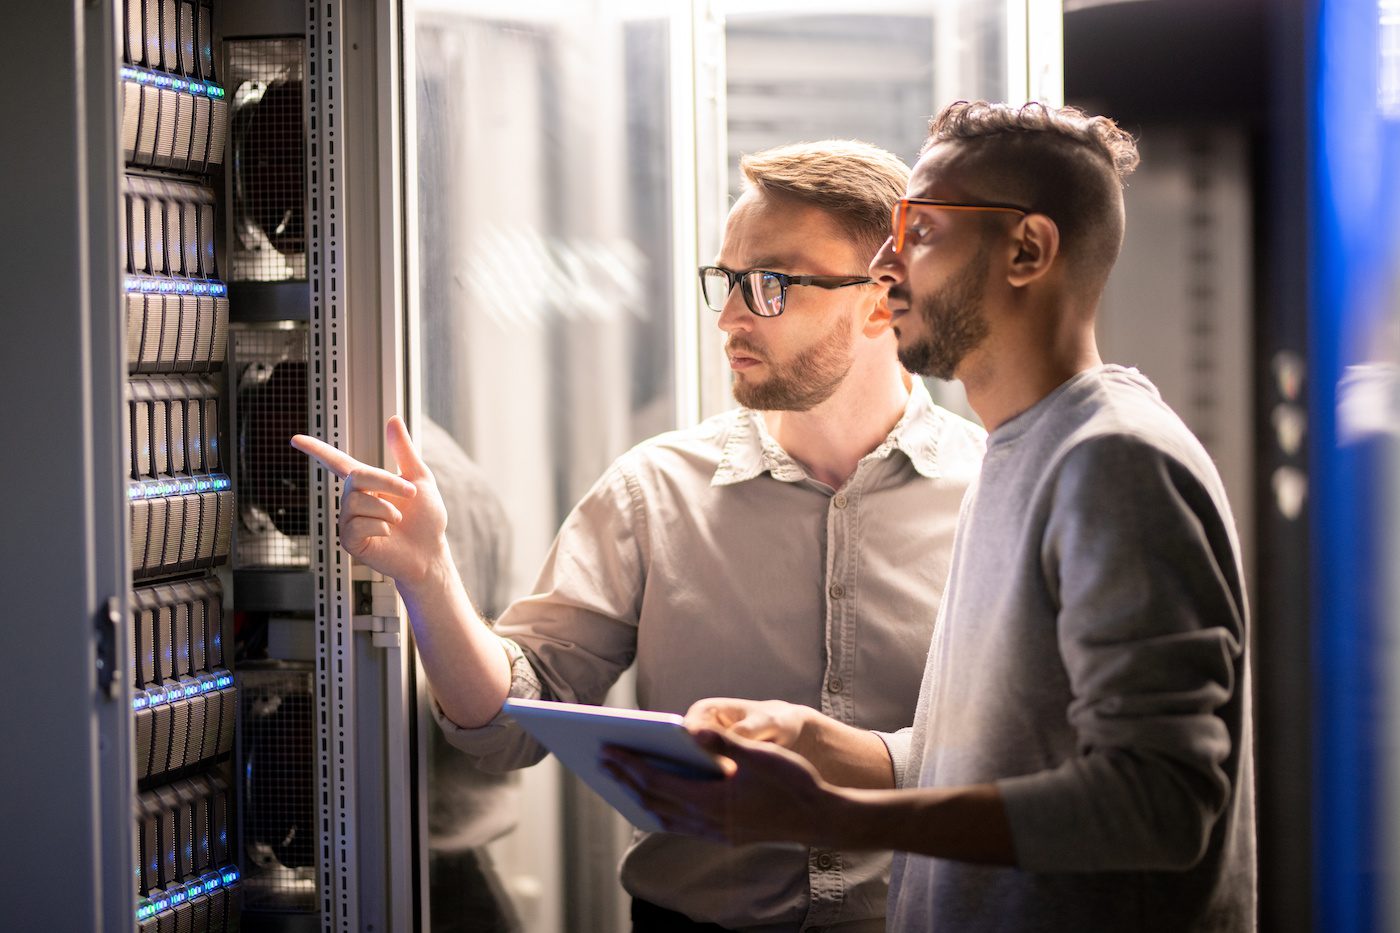 A pair of data center employees examine a server.